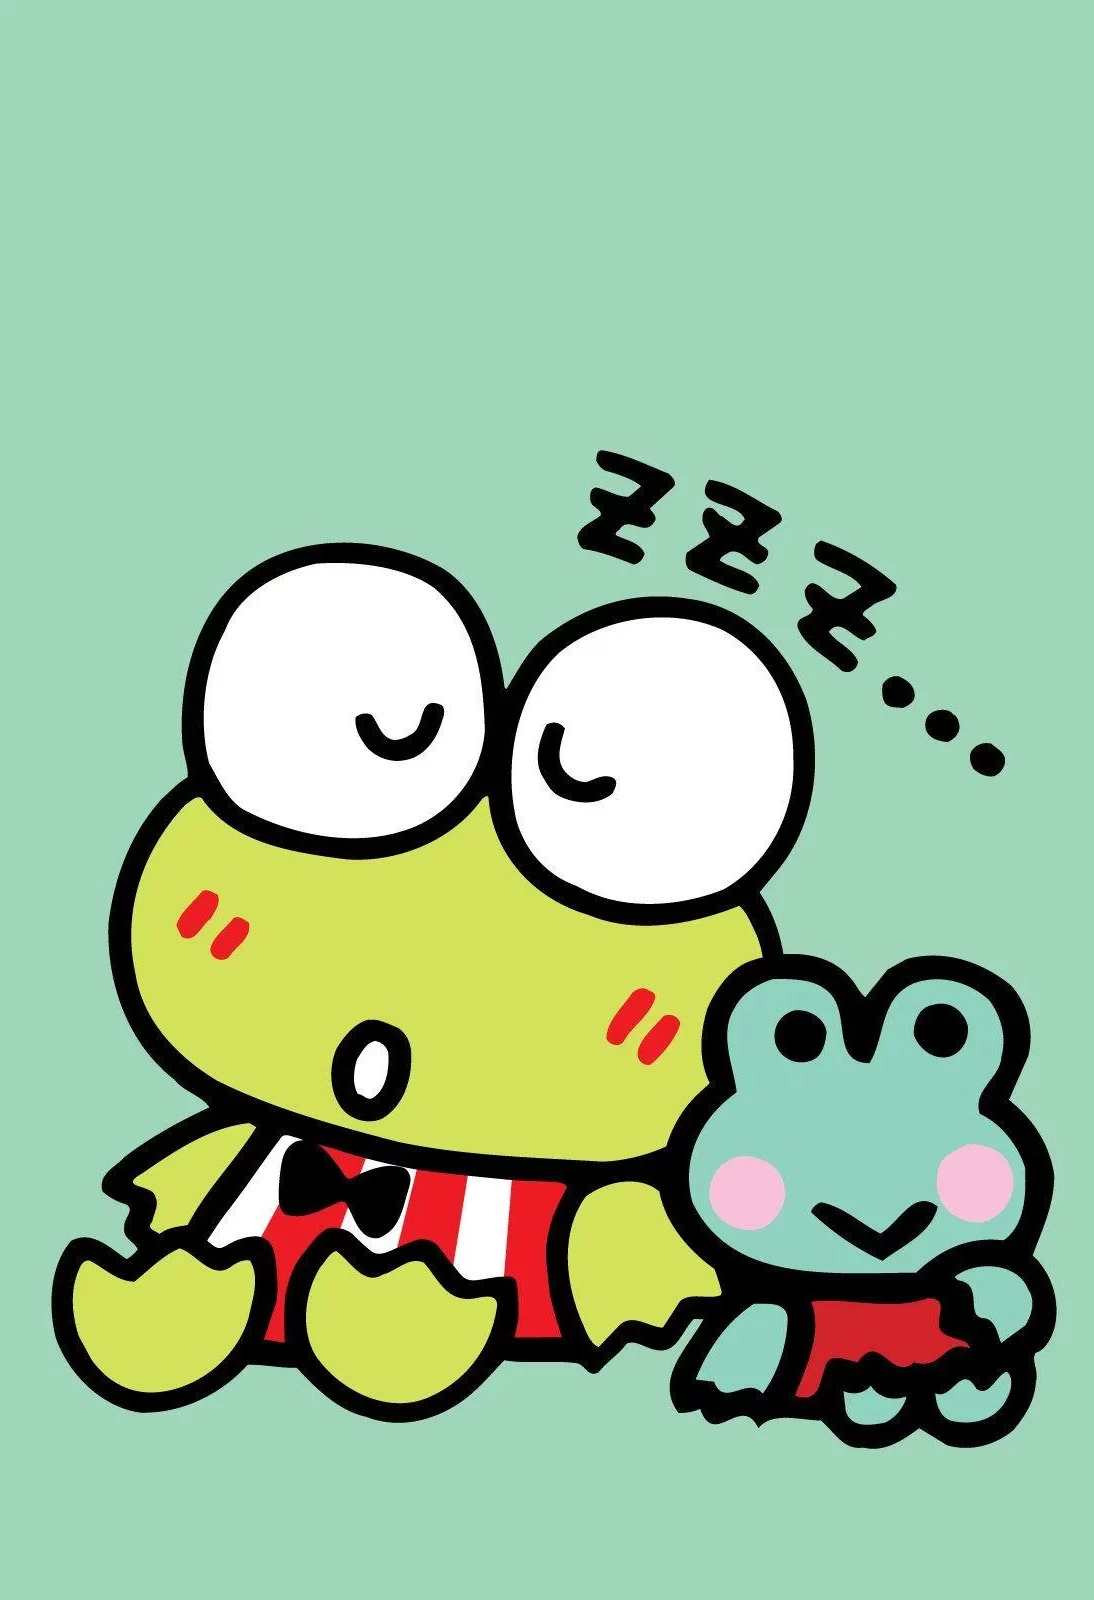 A cartoon frog and toad are sleeping together - Keroppi